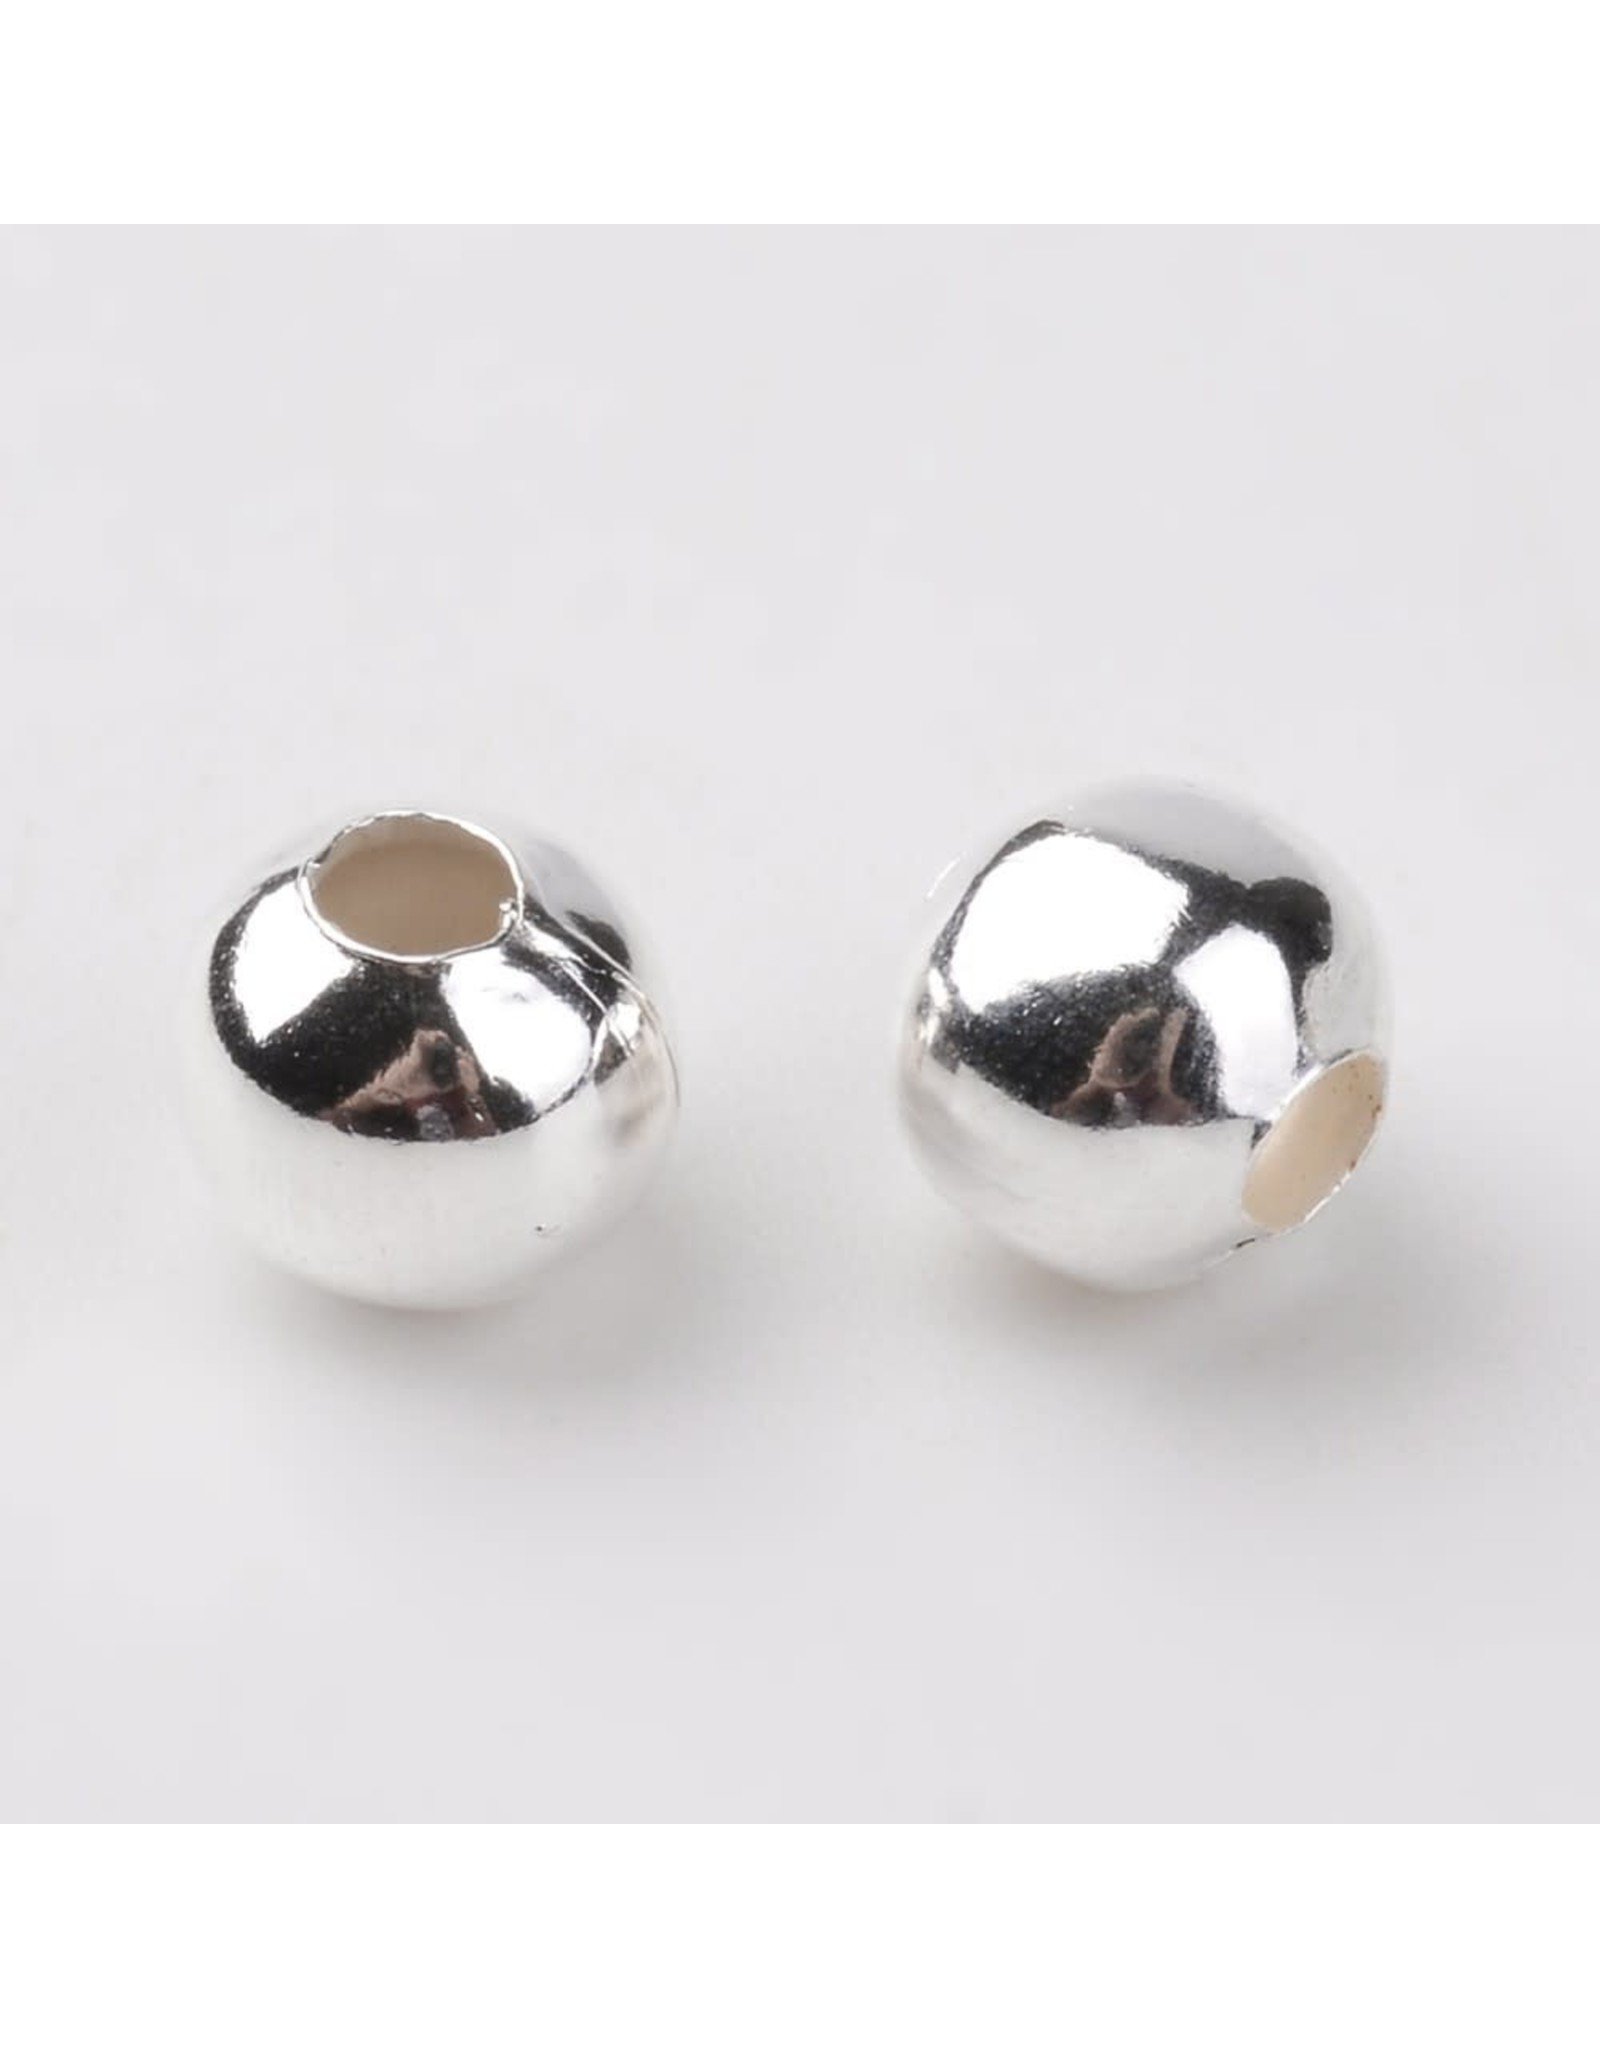 Round Silver Spacer Bead  6mm  x100